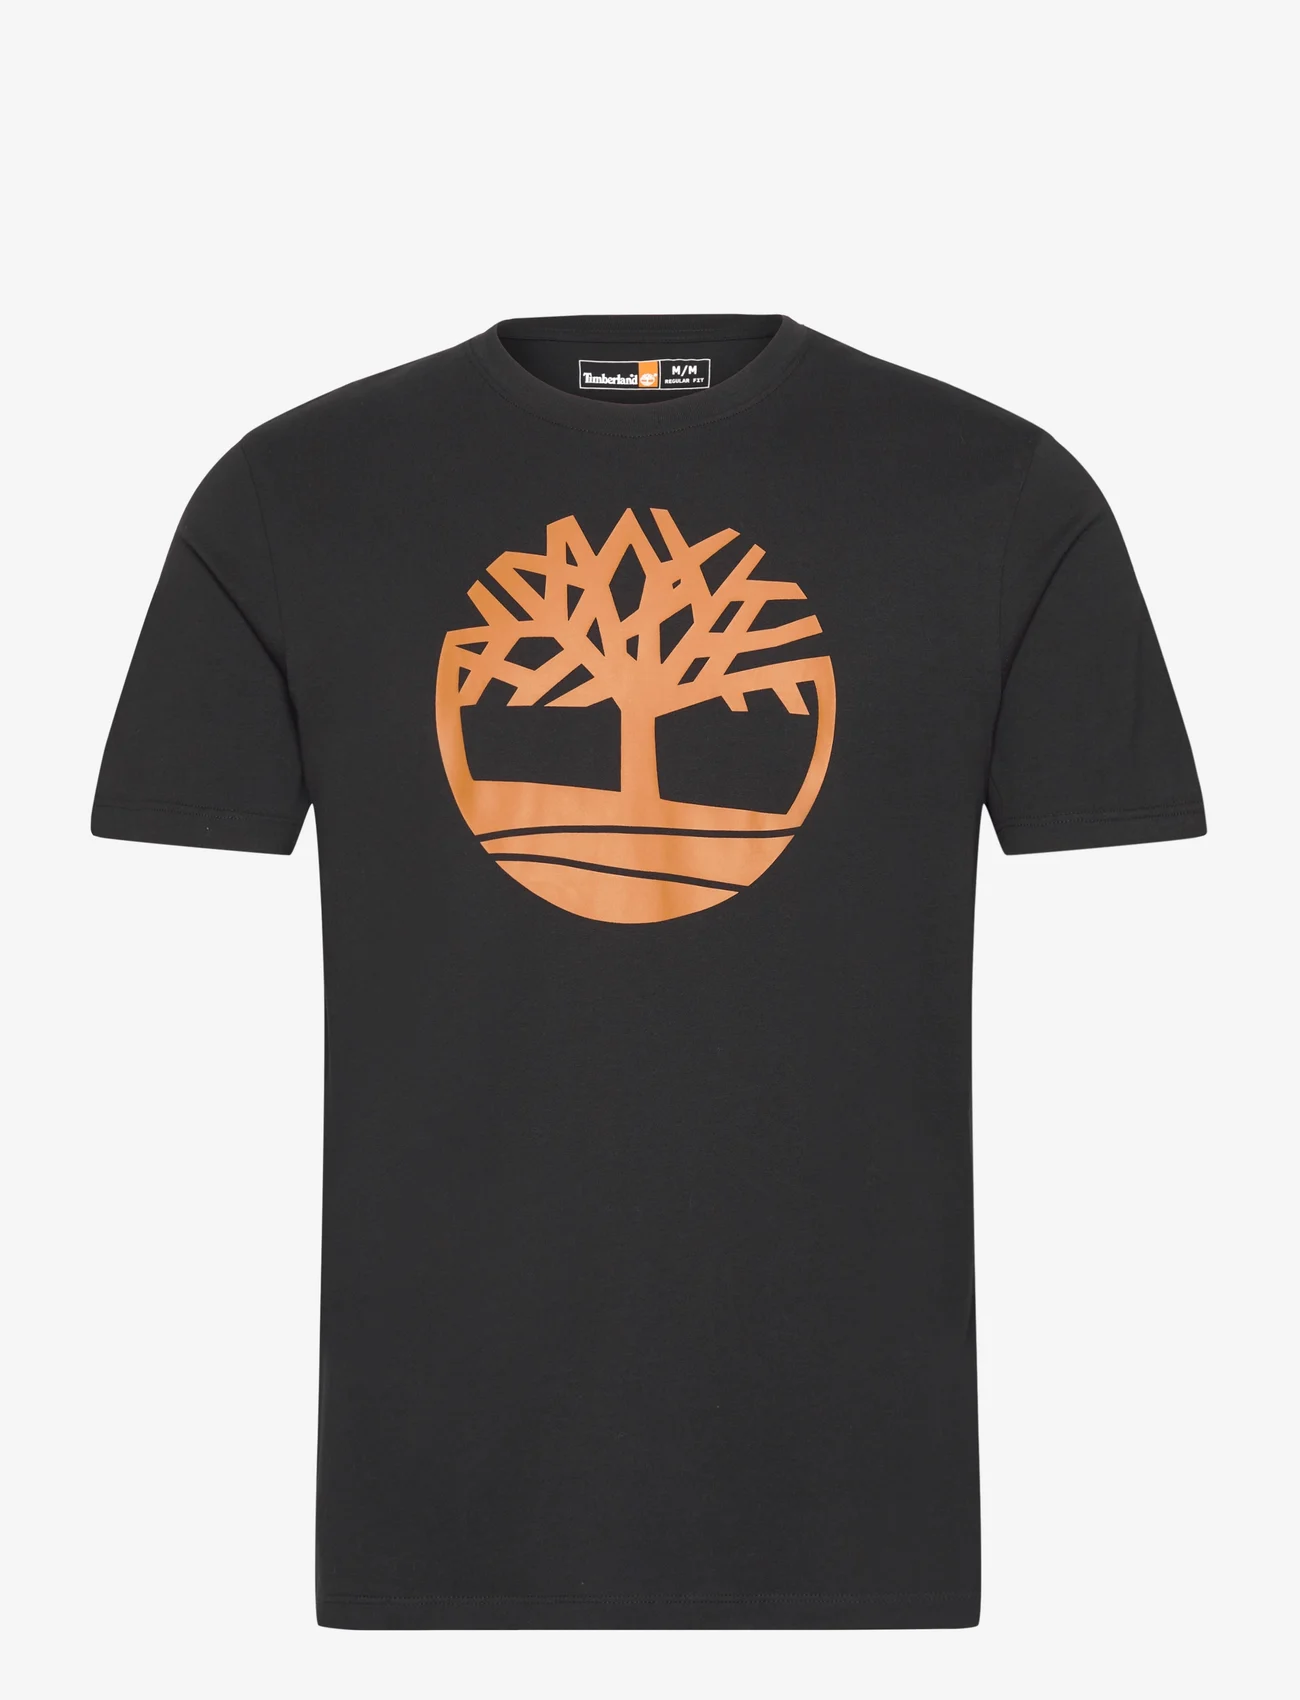 Timberland - KENNEBEC RIVER Tree Logo Short Sleeve Tee BLACK/WHEAT BOOT - lowest prices - black/wheat boot - 0